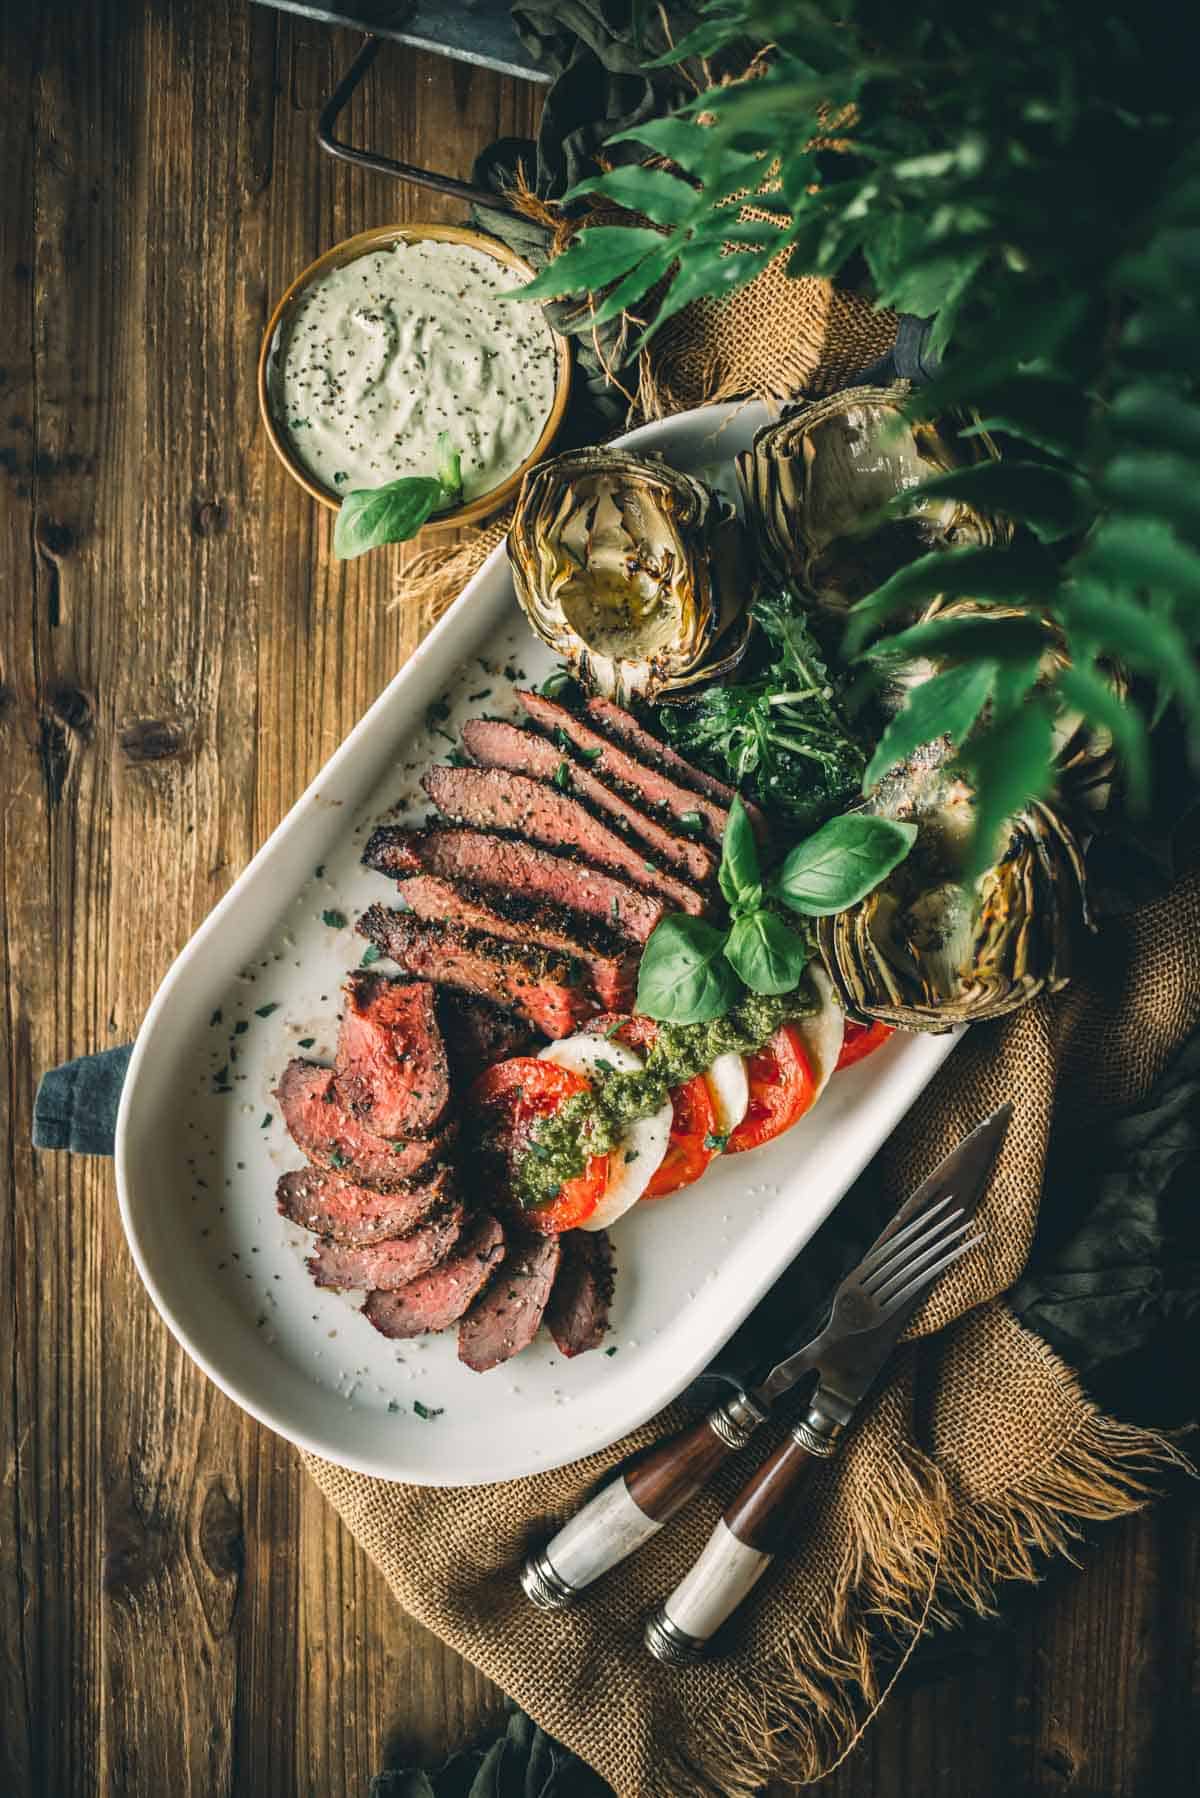 A platter with sliced tri-tip, fresh tomatoes, mozzarella, basil leaves, and grilled artichokes. Two forks on the side. A bowl filled with a green dip in the background.